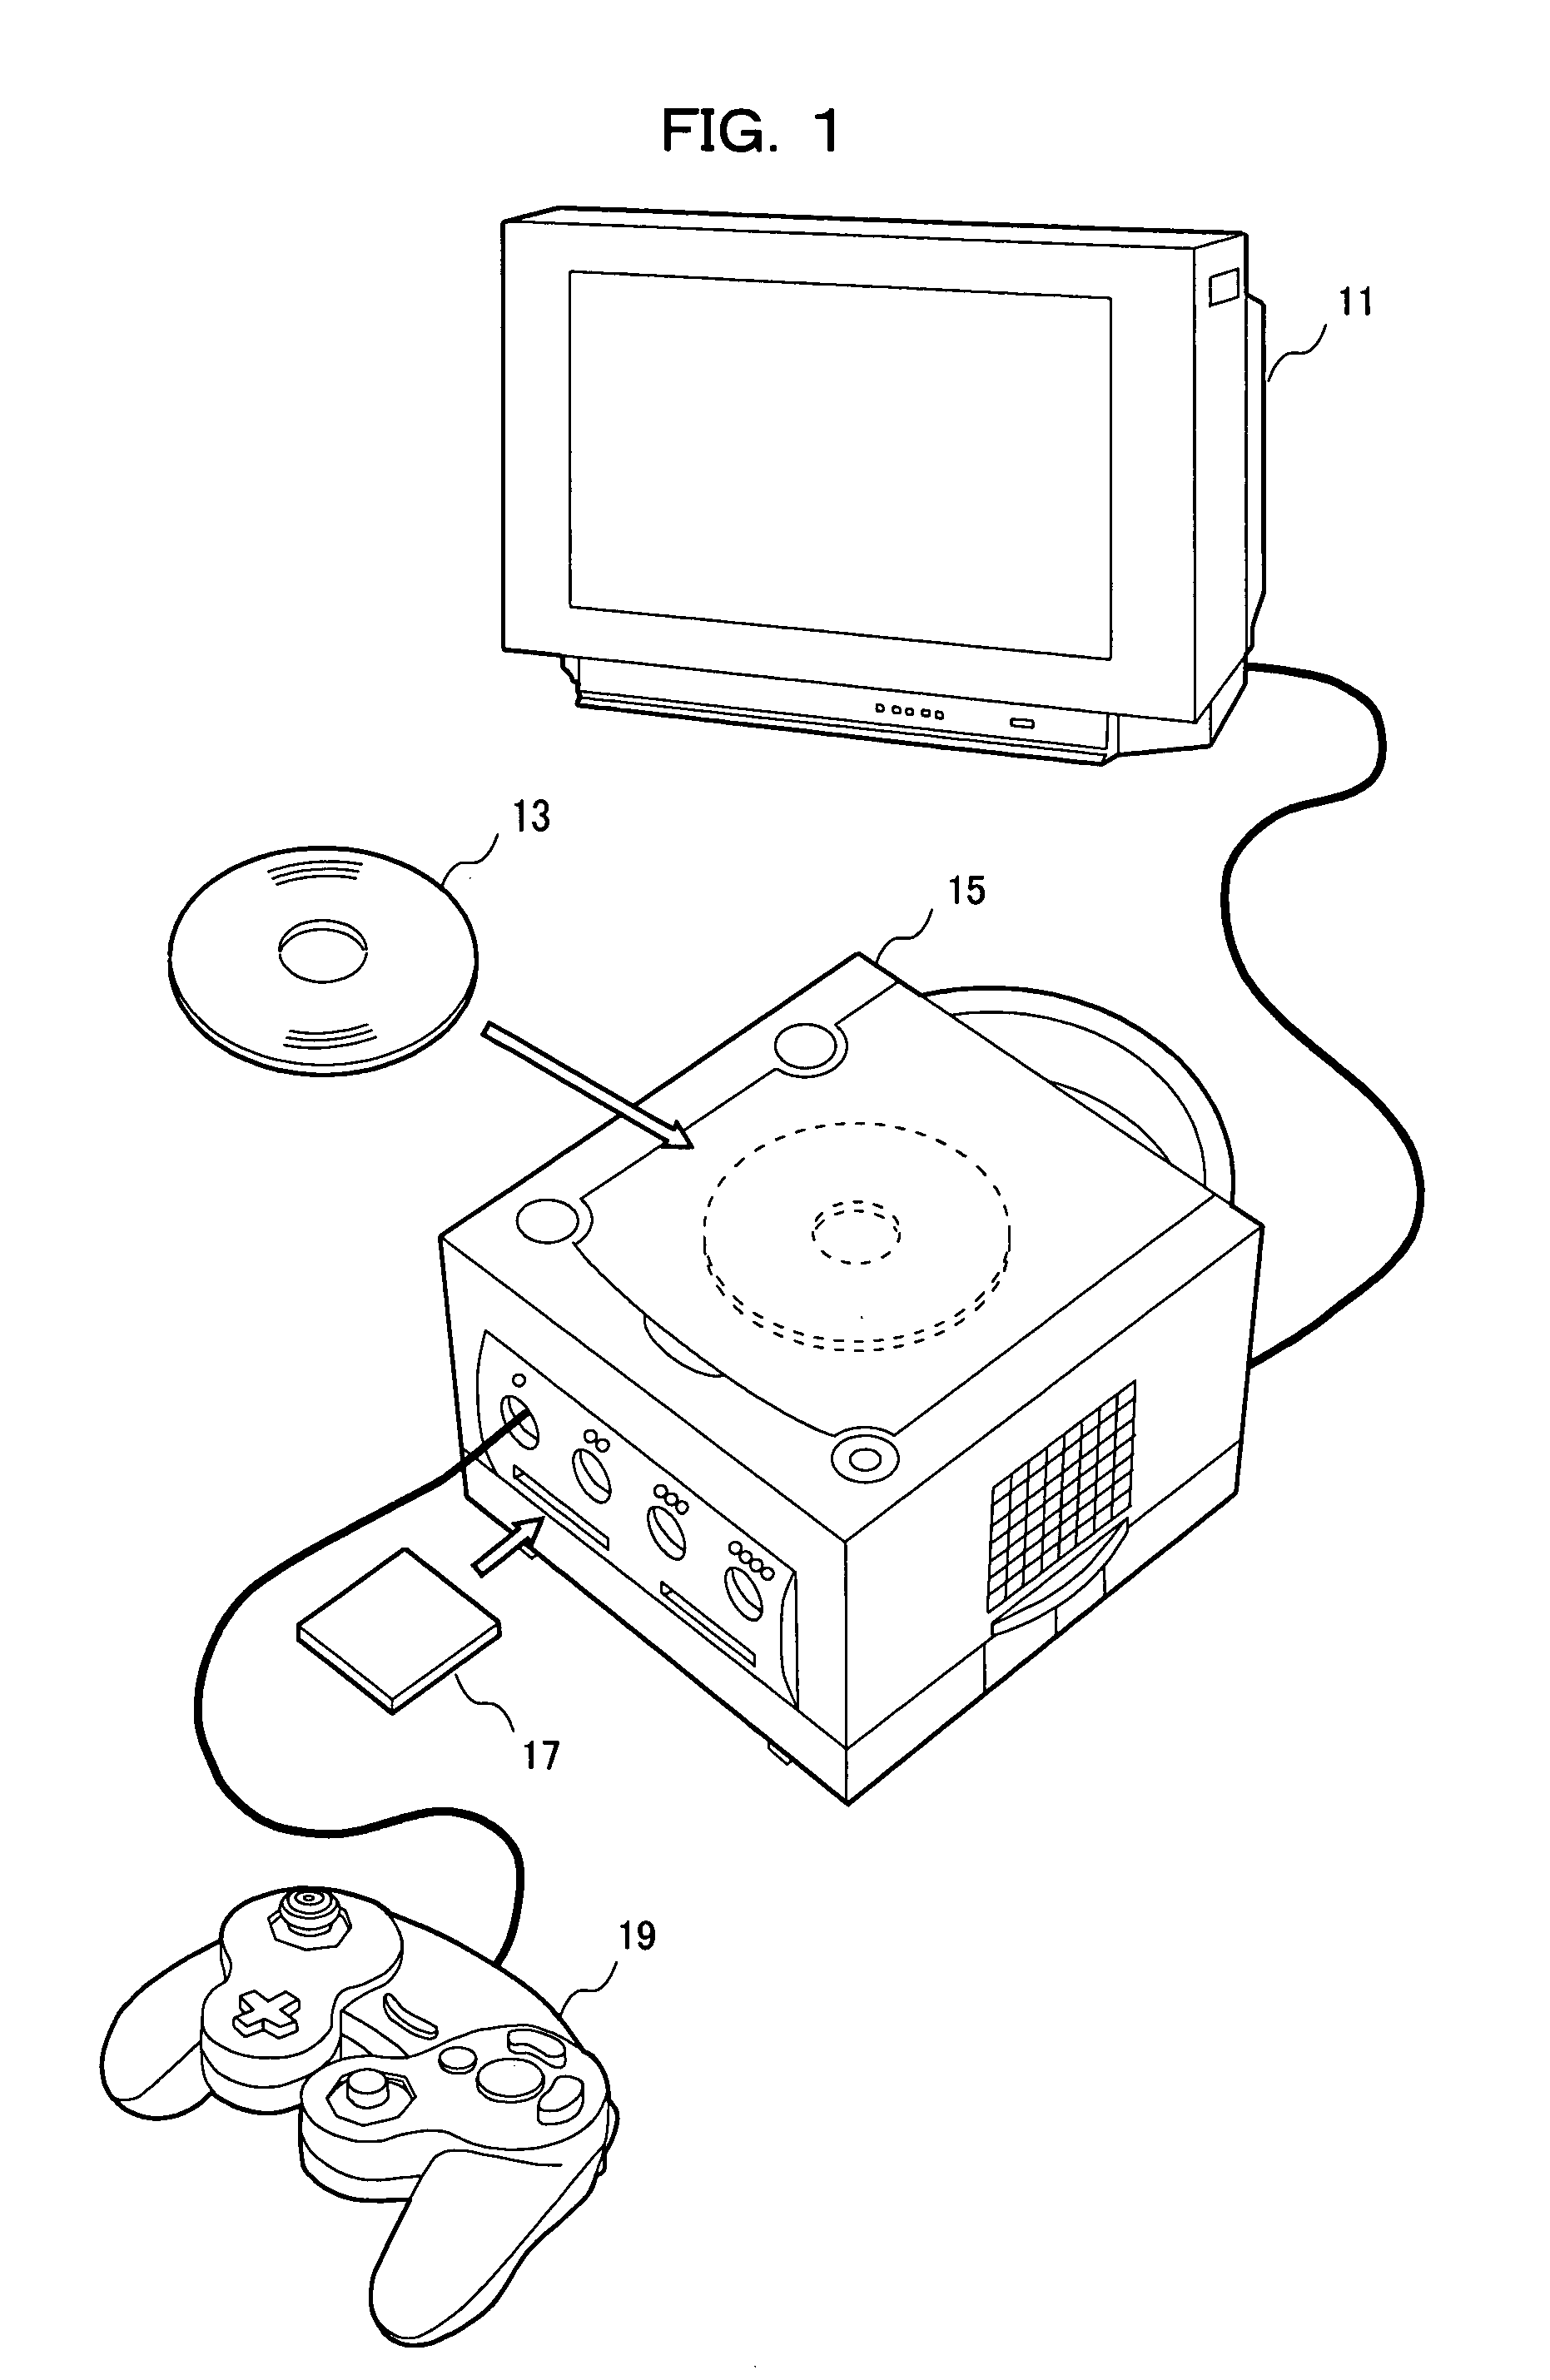 Racing game program and video game device